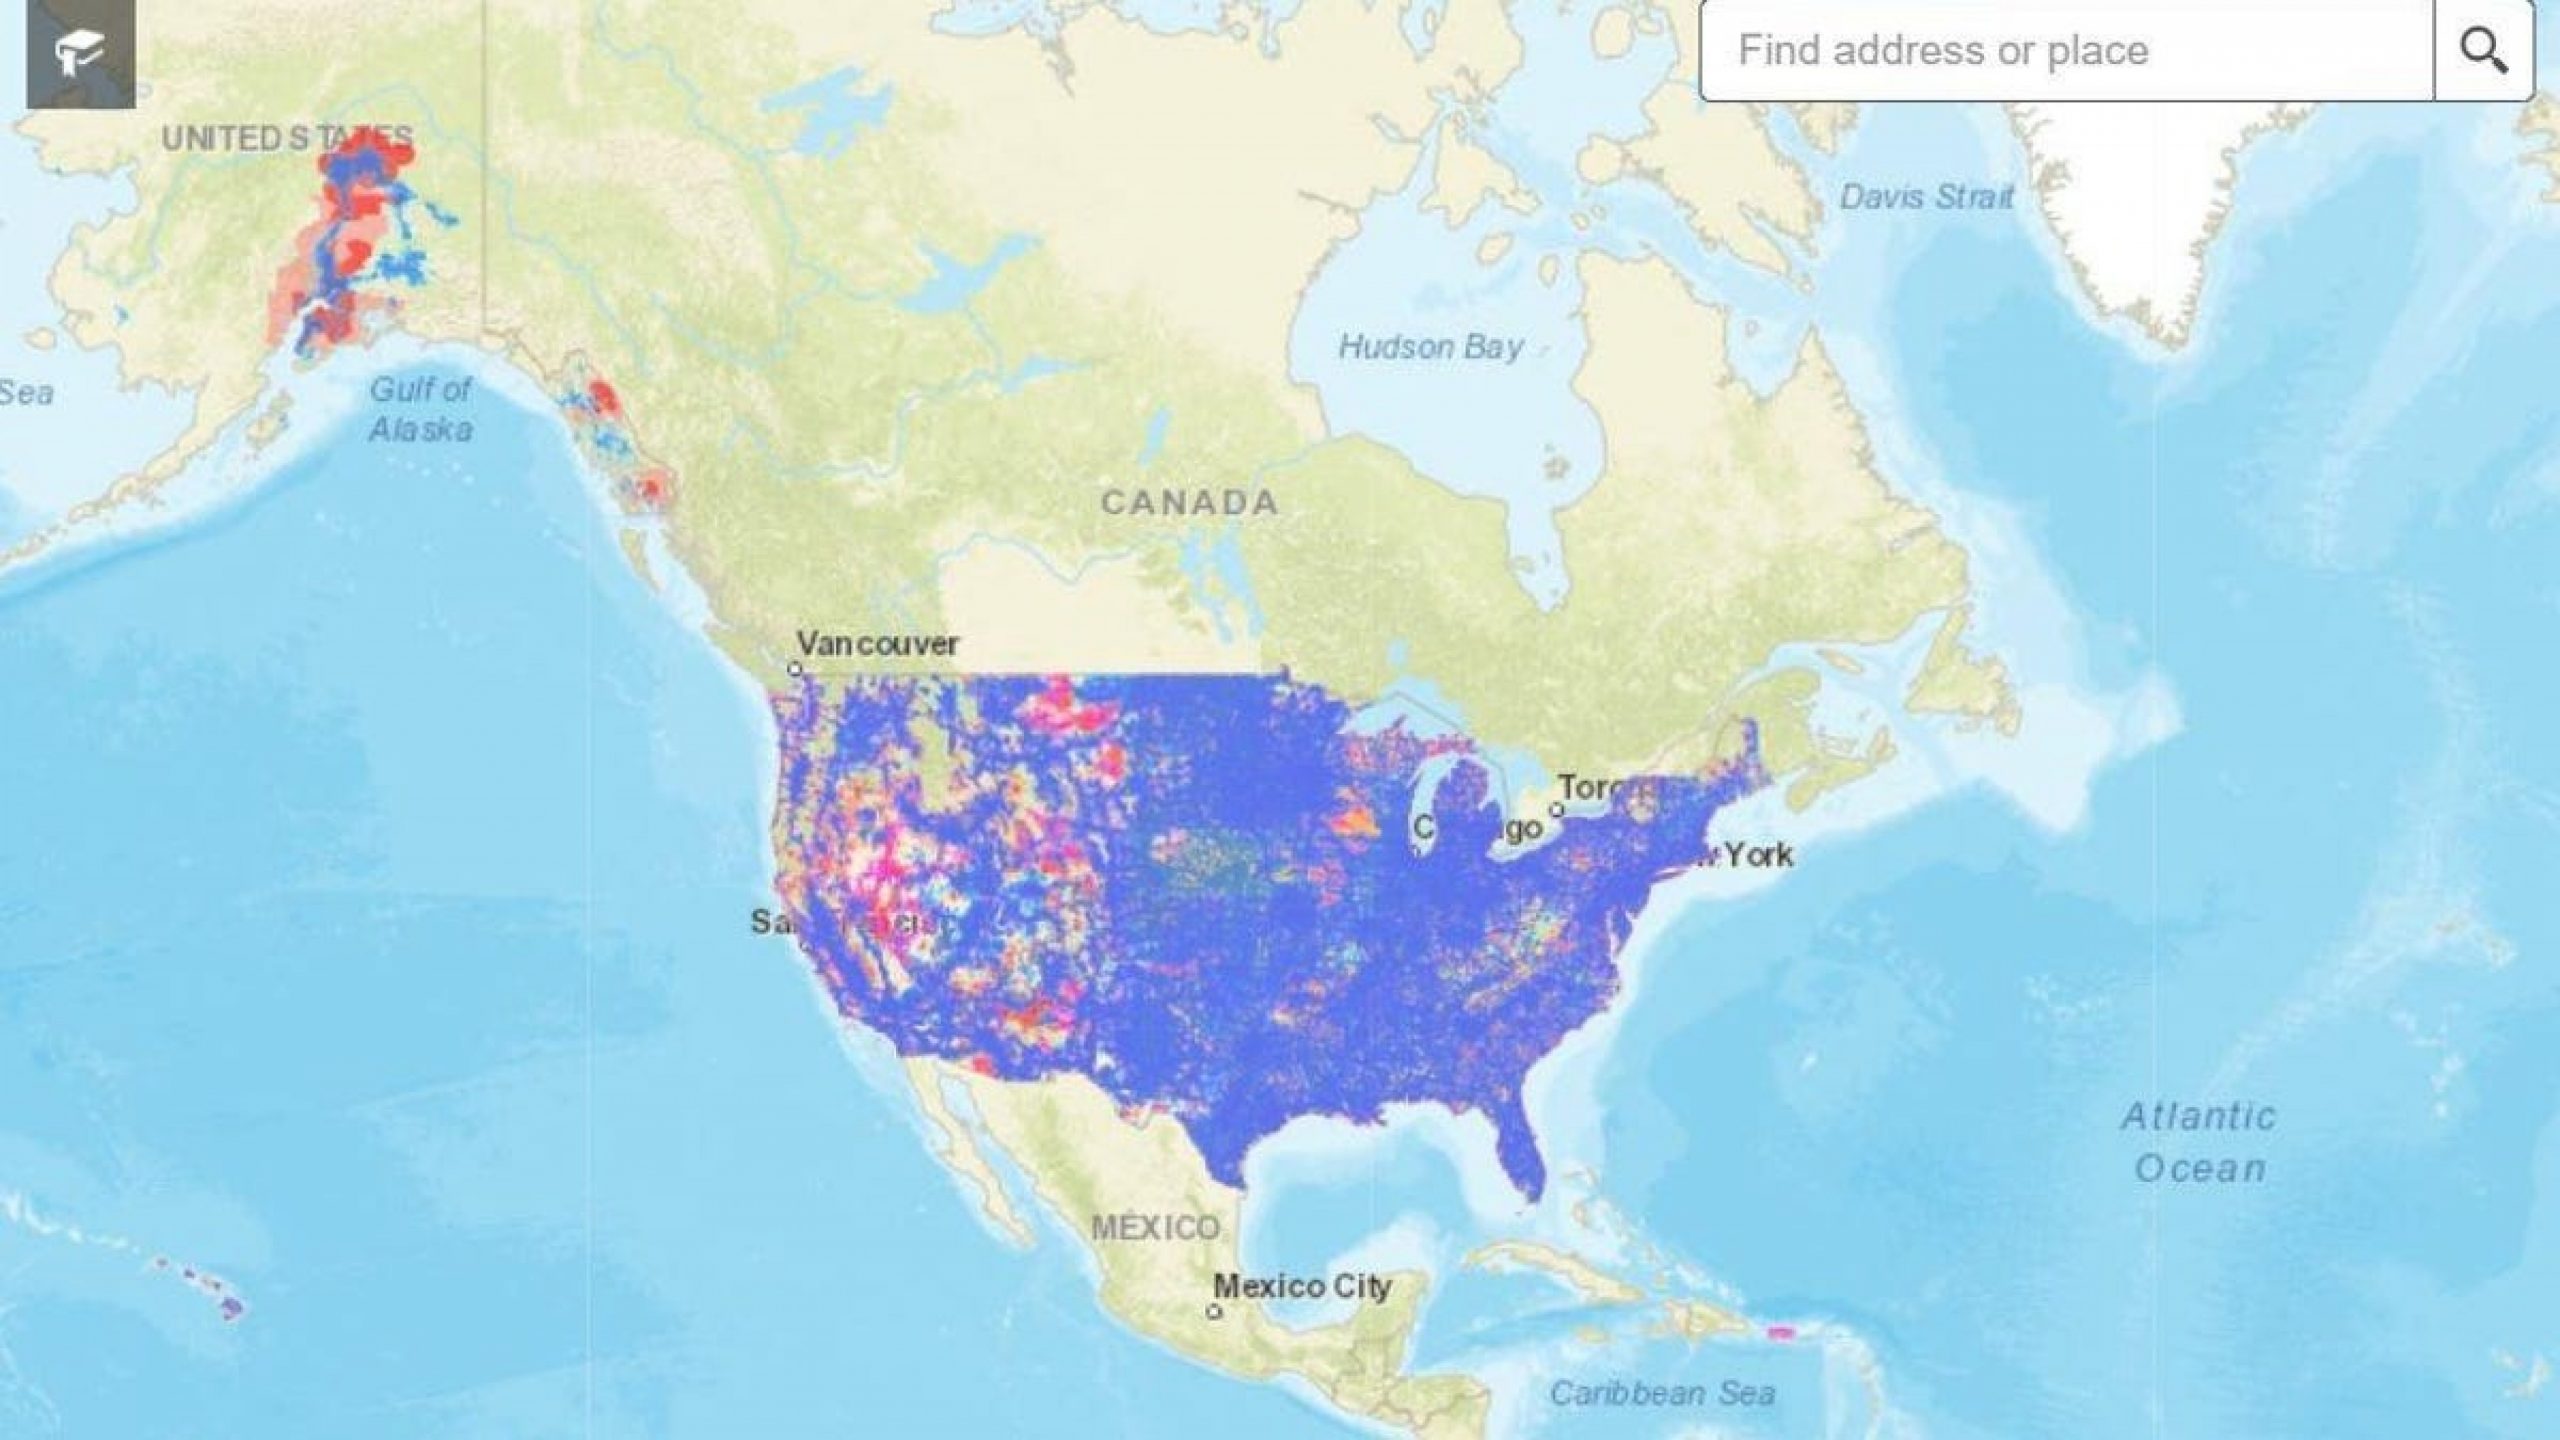 FCC Finally Debuts an Up-to-Date Mobile Broadband Map of the U.S.